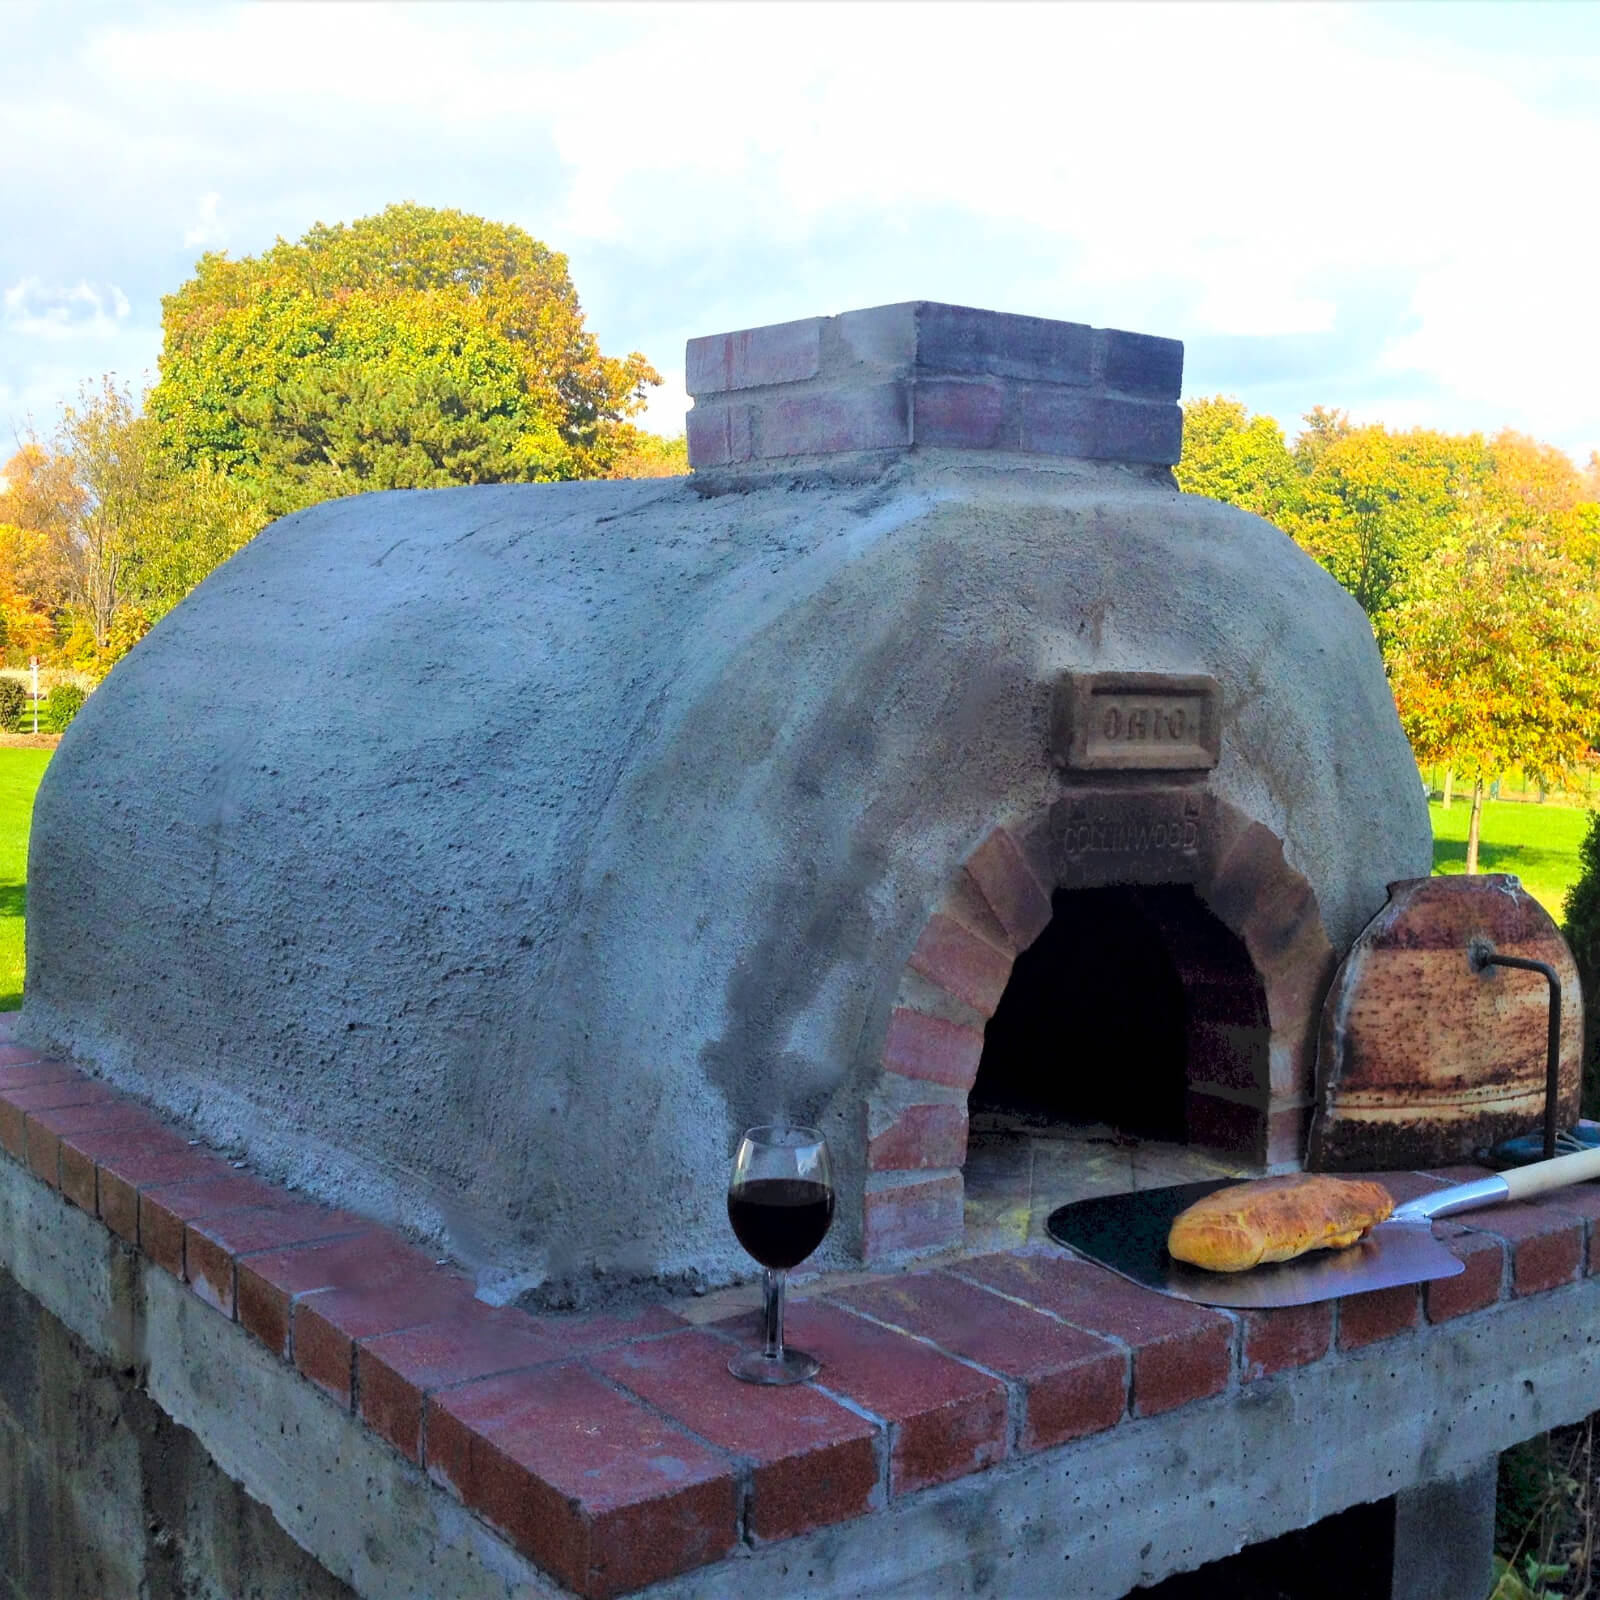 Outdoor Pizza and Bread Oven – BrickWood Ovens